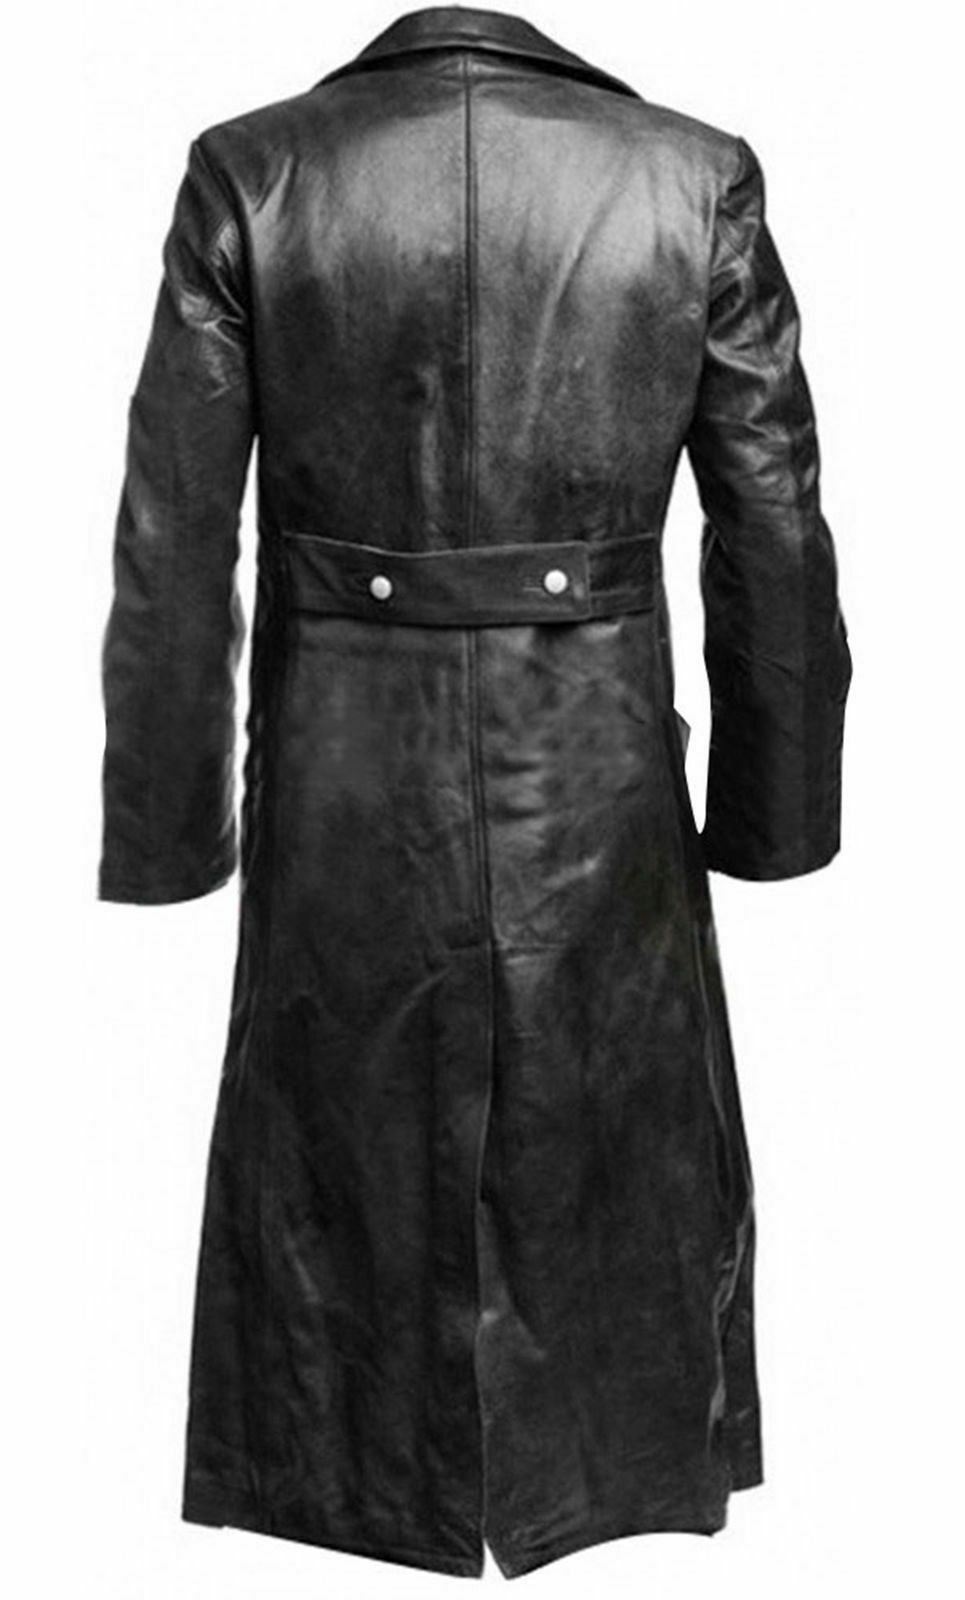 MEN'S CLASSIC OFFICER MILITARY BLACK FAUX/SYNTHETIC LEATHER LONG GERMAN TRENCH COAT